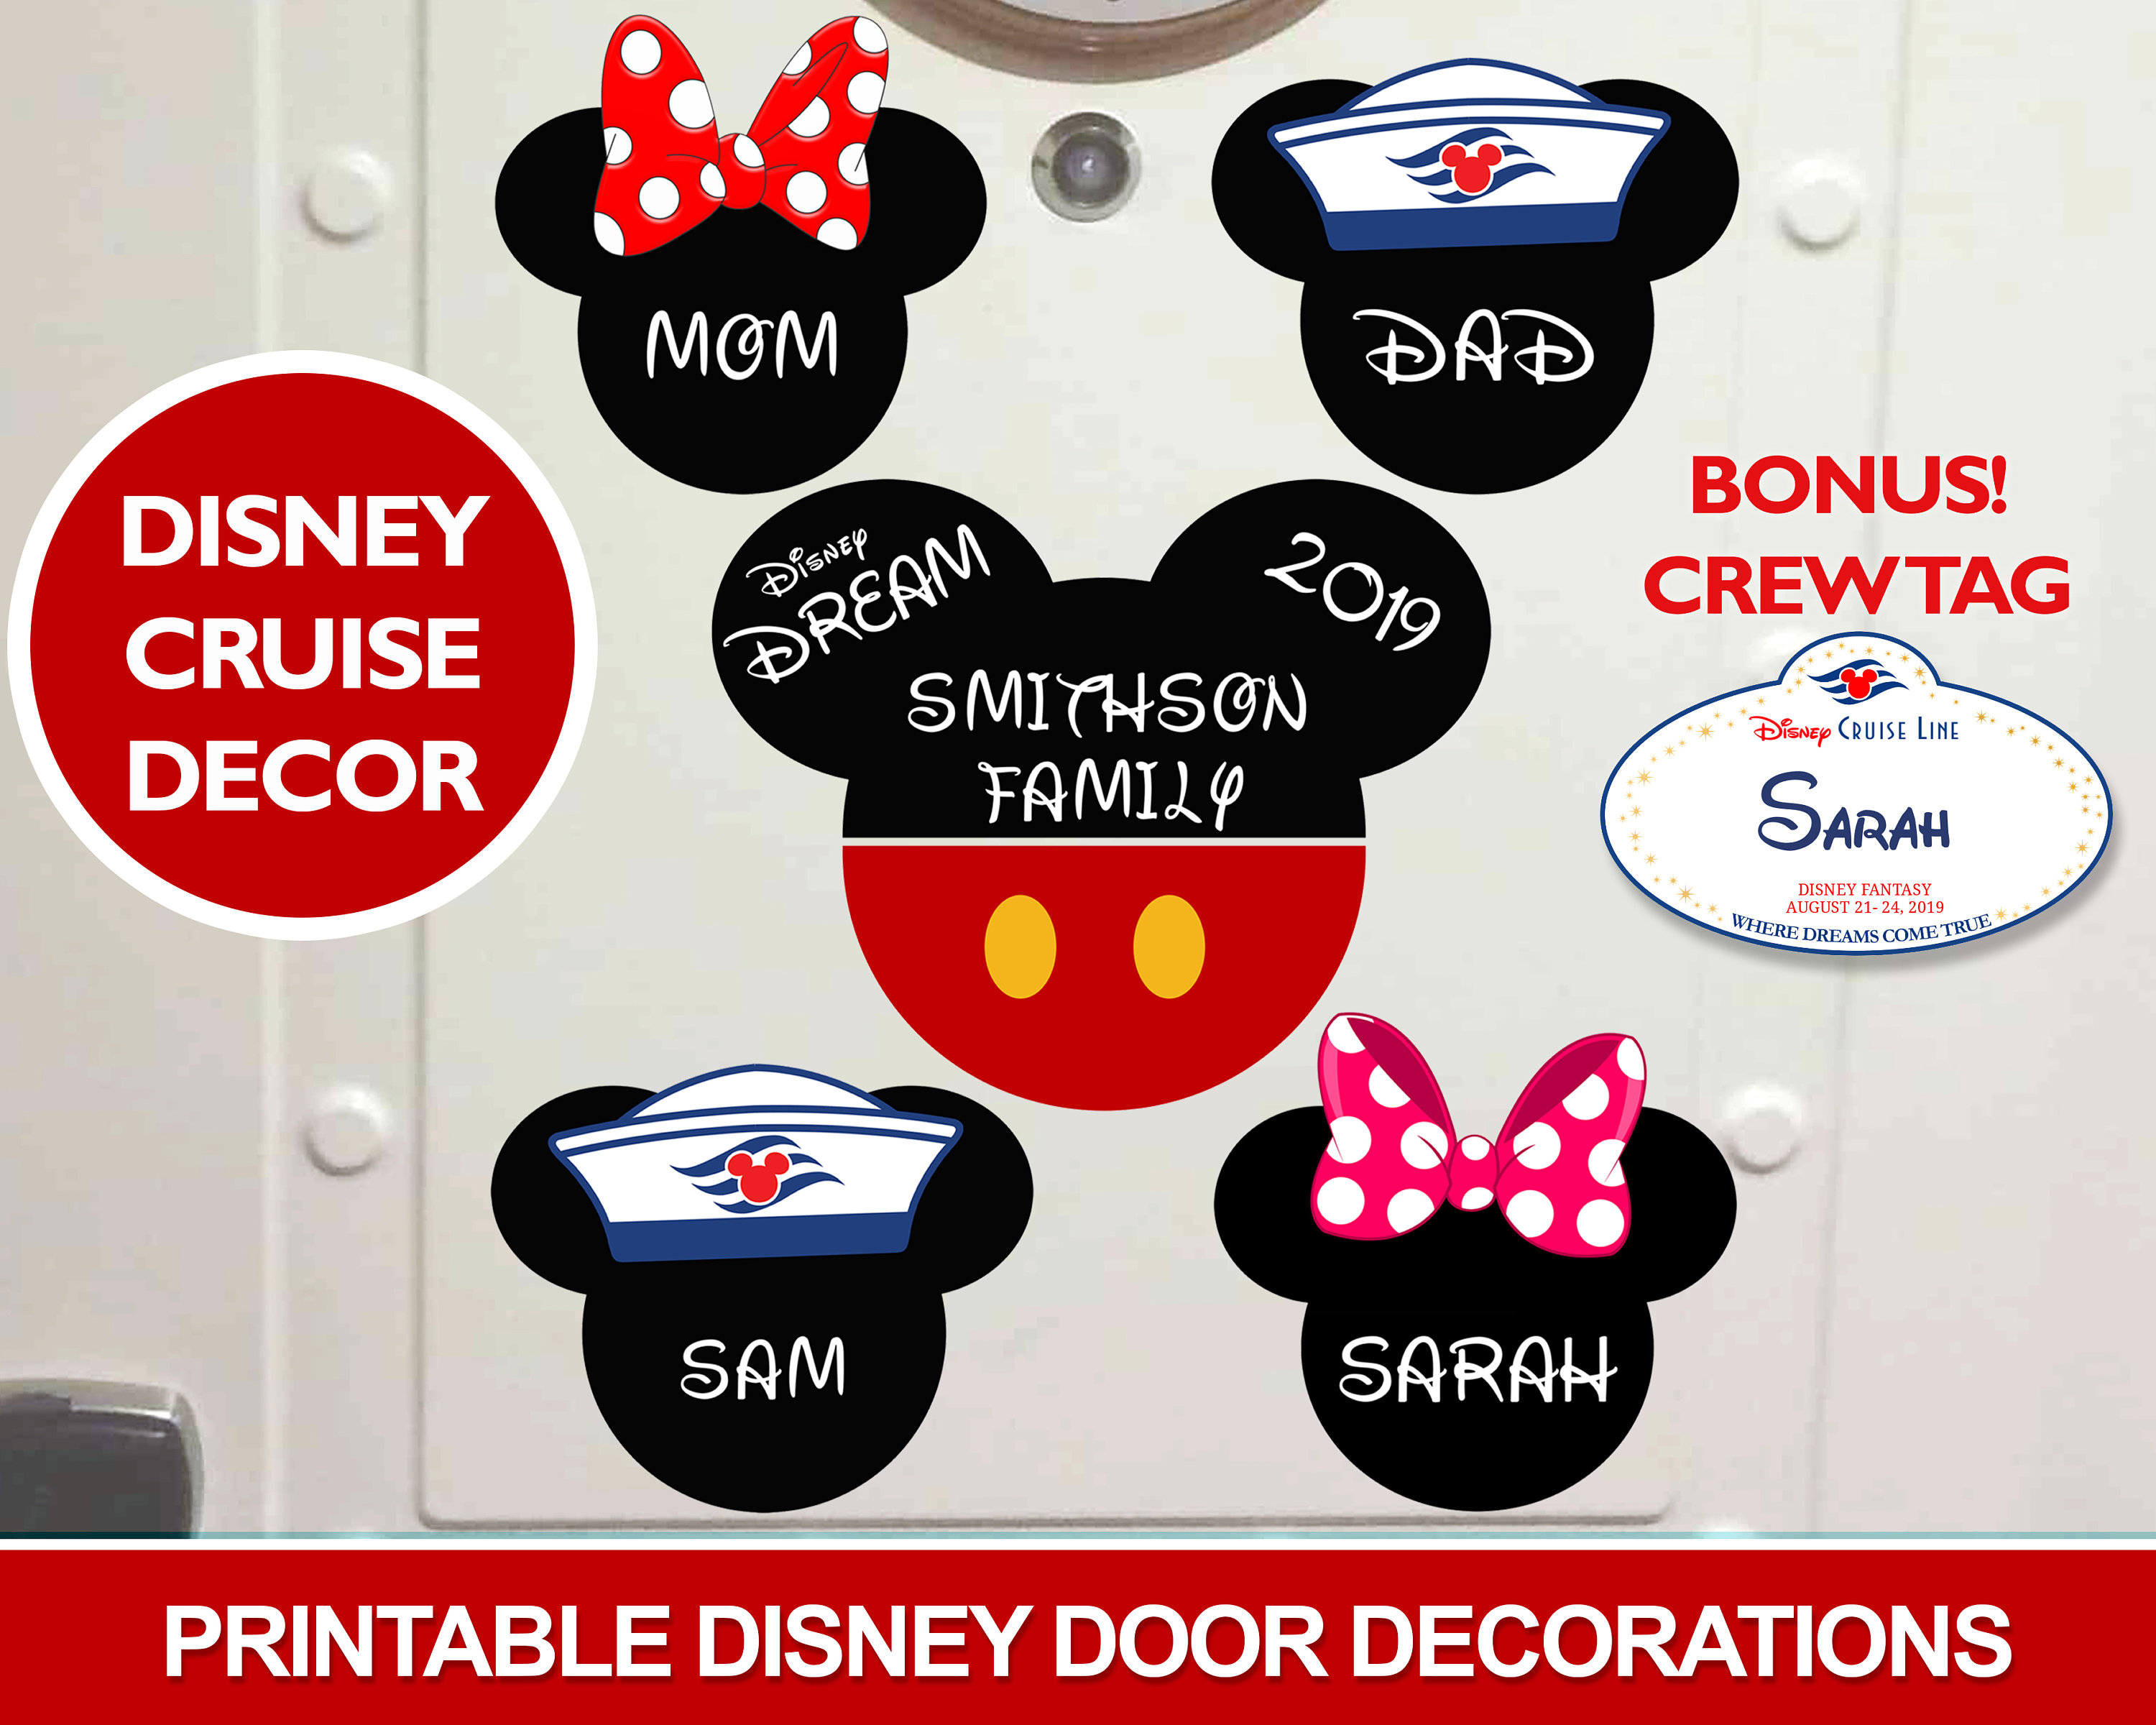 disney-cruise-door-magnets-ideas-and-tips-for-your-family-cruise